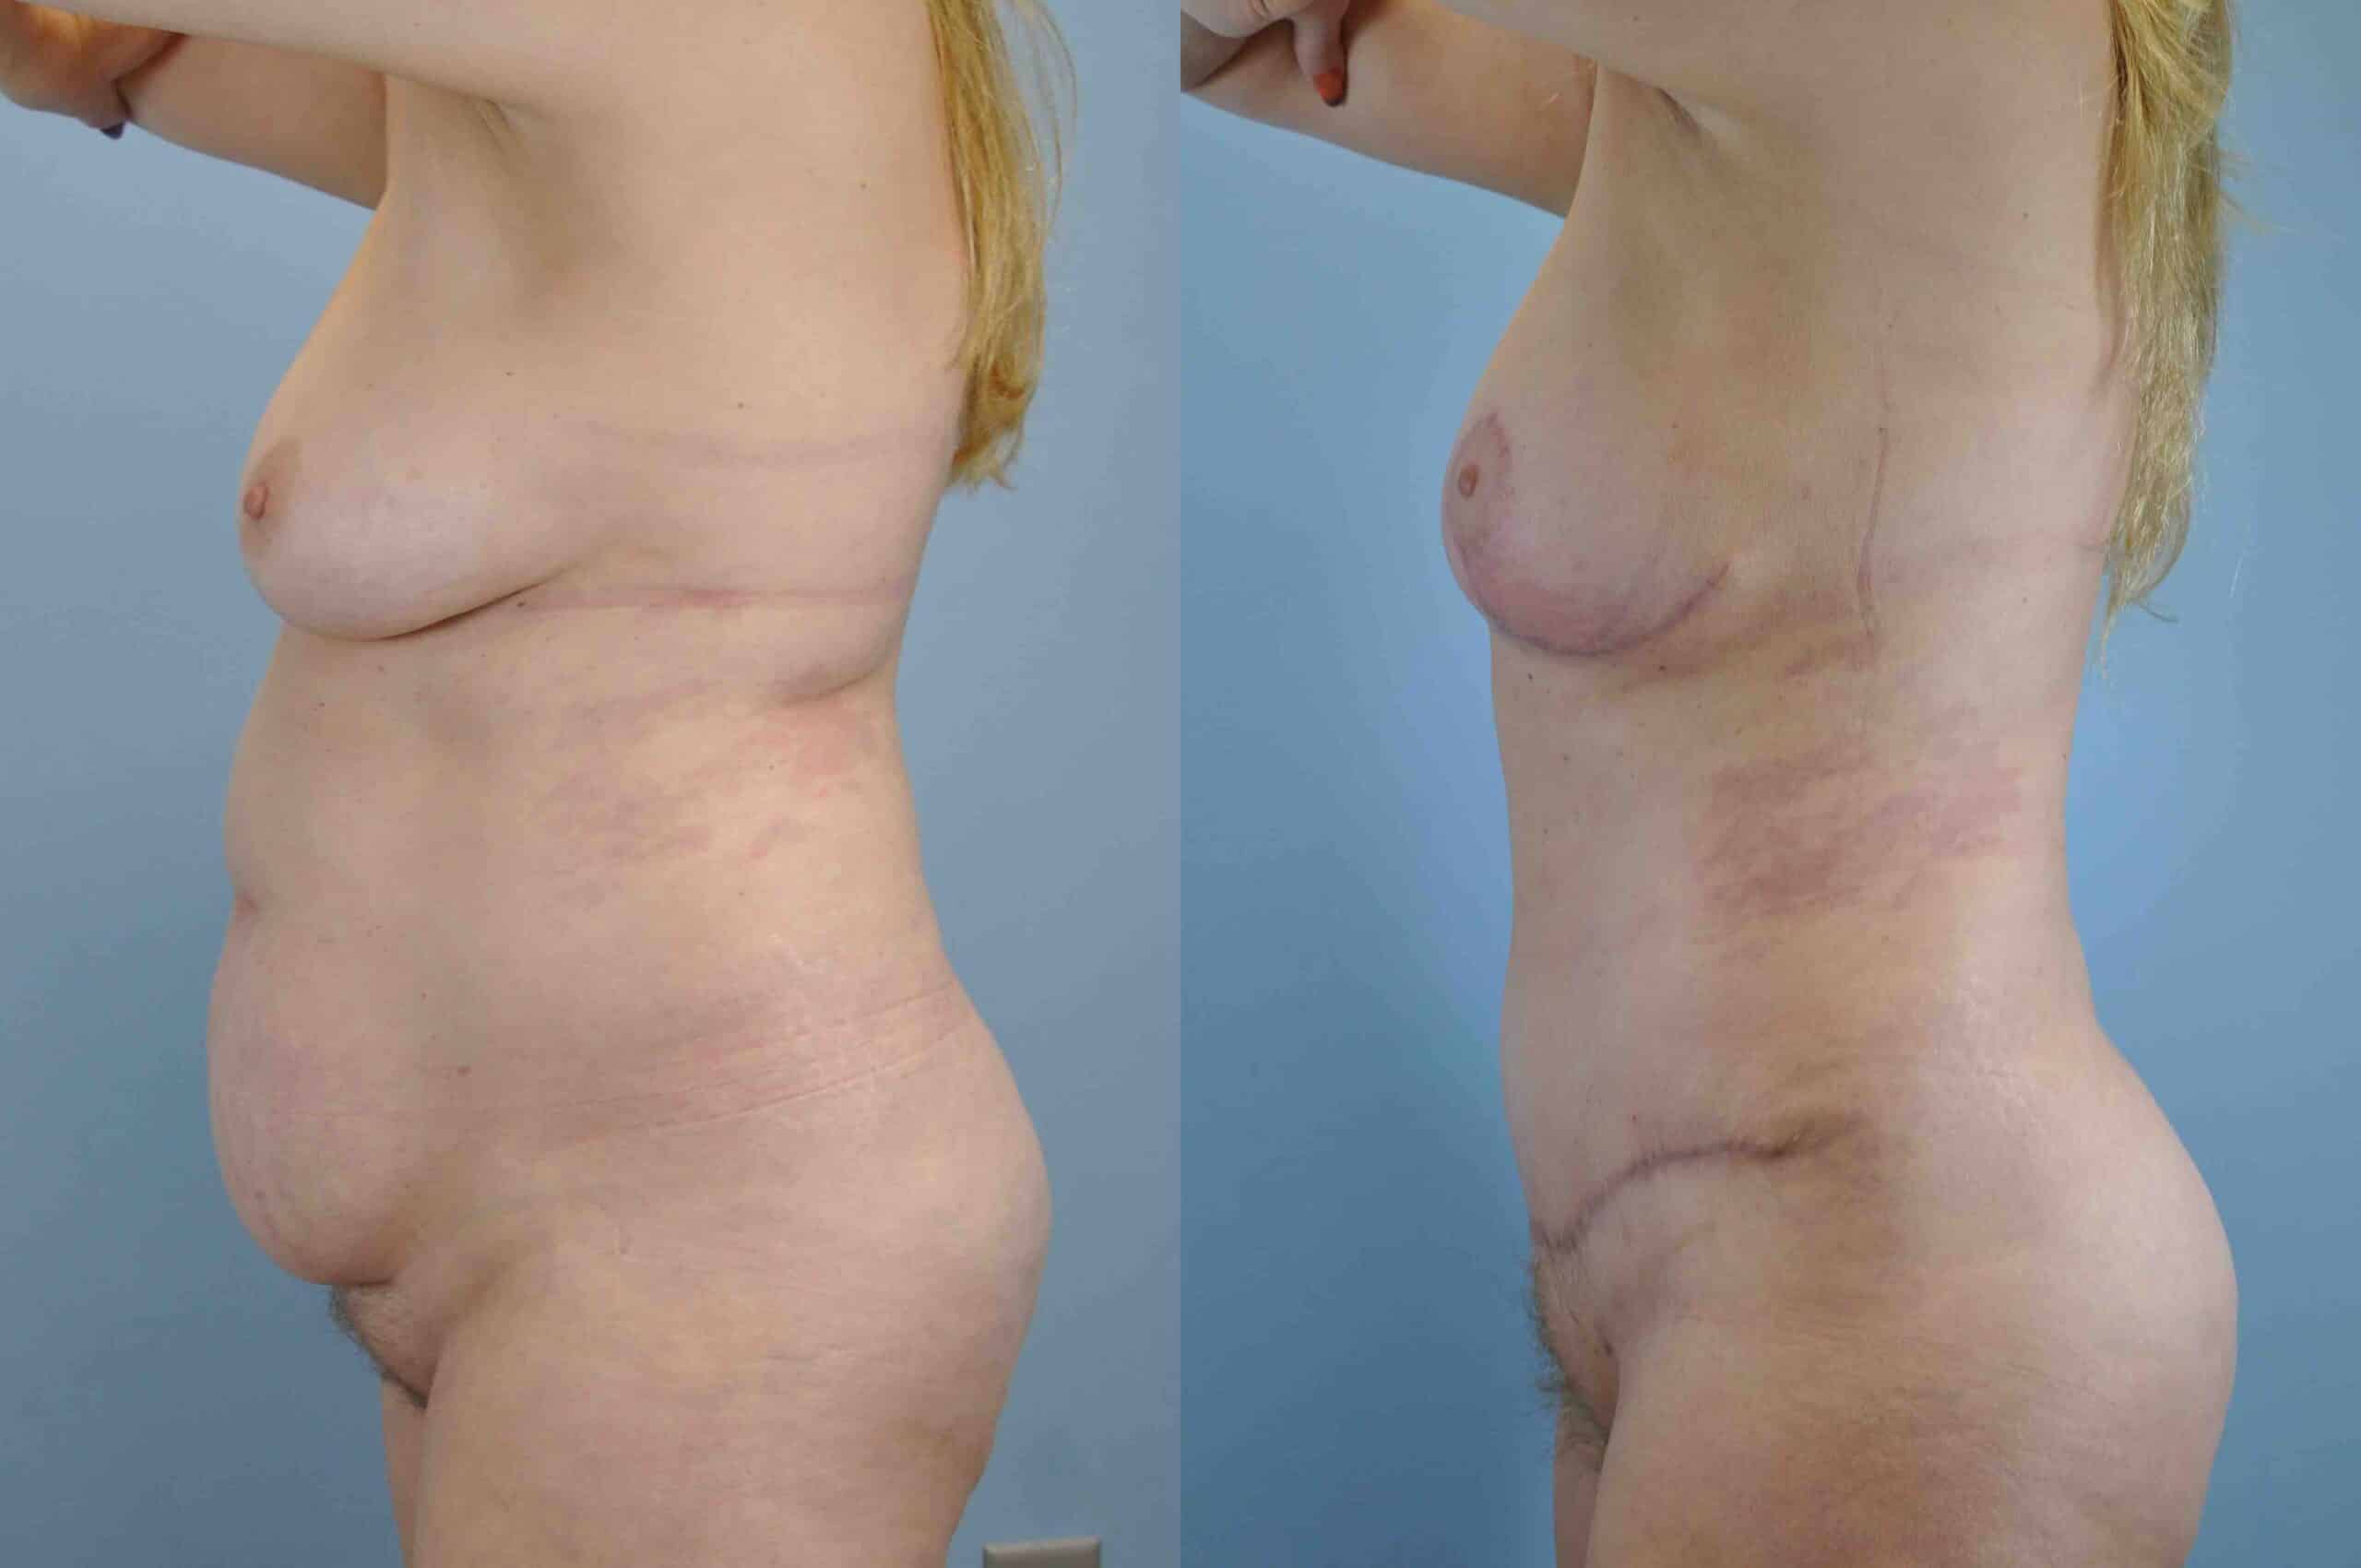 Before and after, 1 yr post op from Tummy Tuck, Breast Lift/Mastopexy, VASER Abdomen Flanks & Back performed by Dr. Paul Vanek (side view)